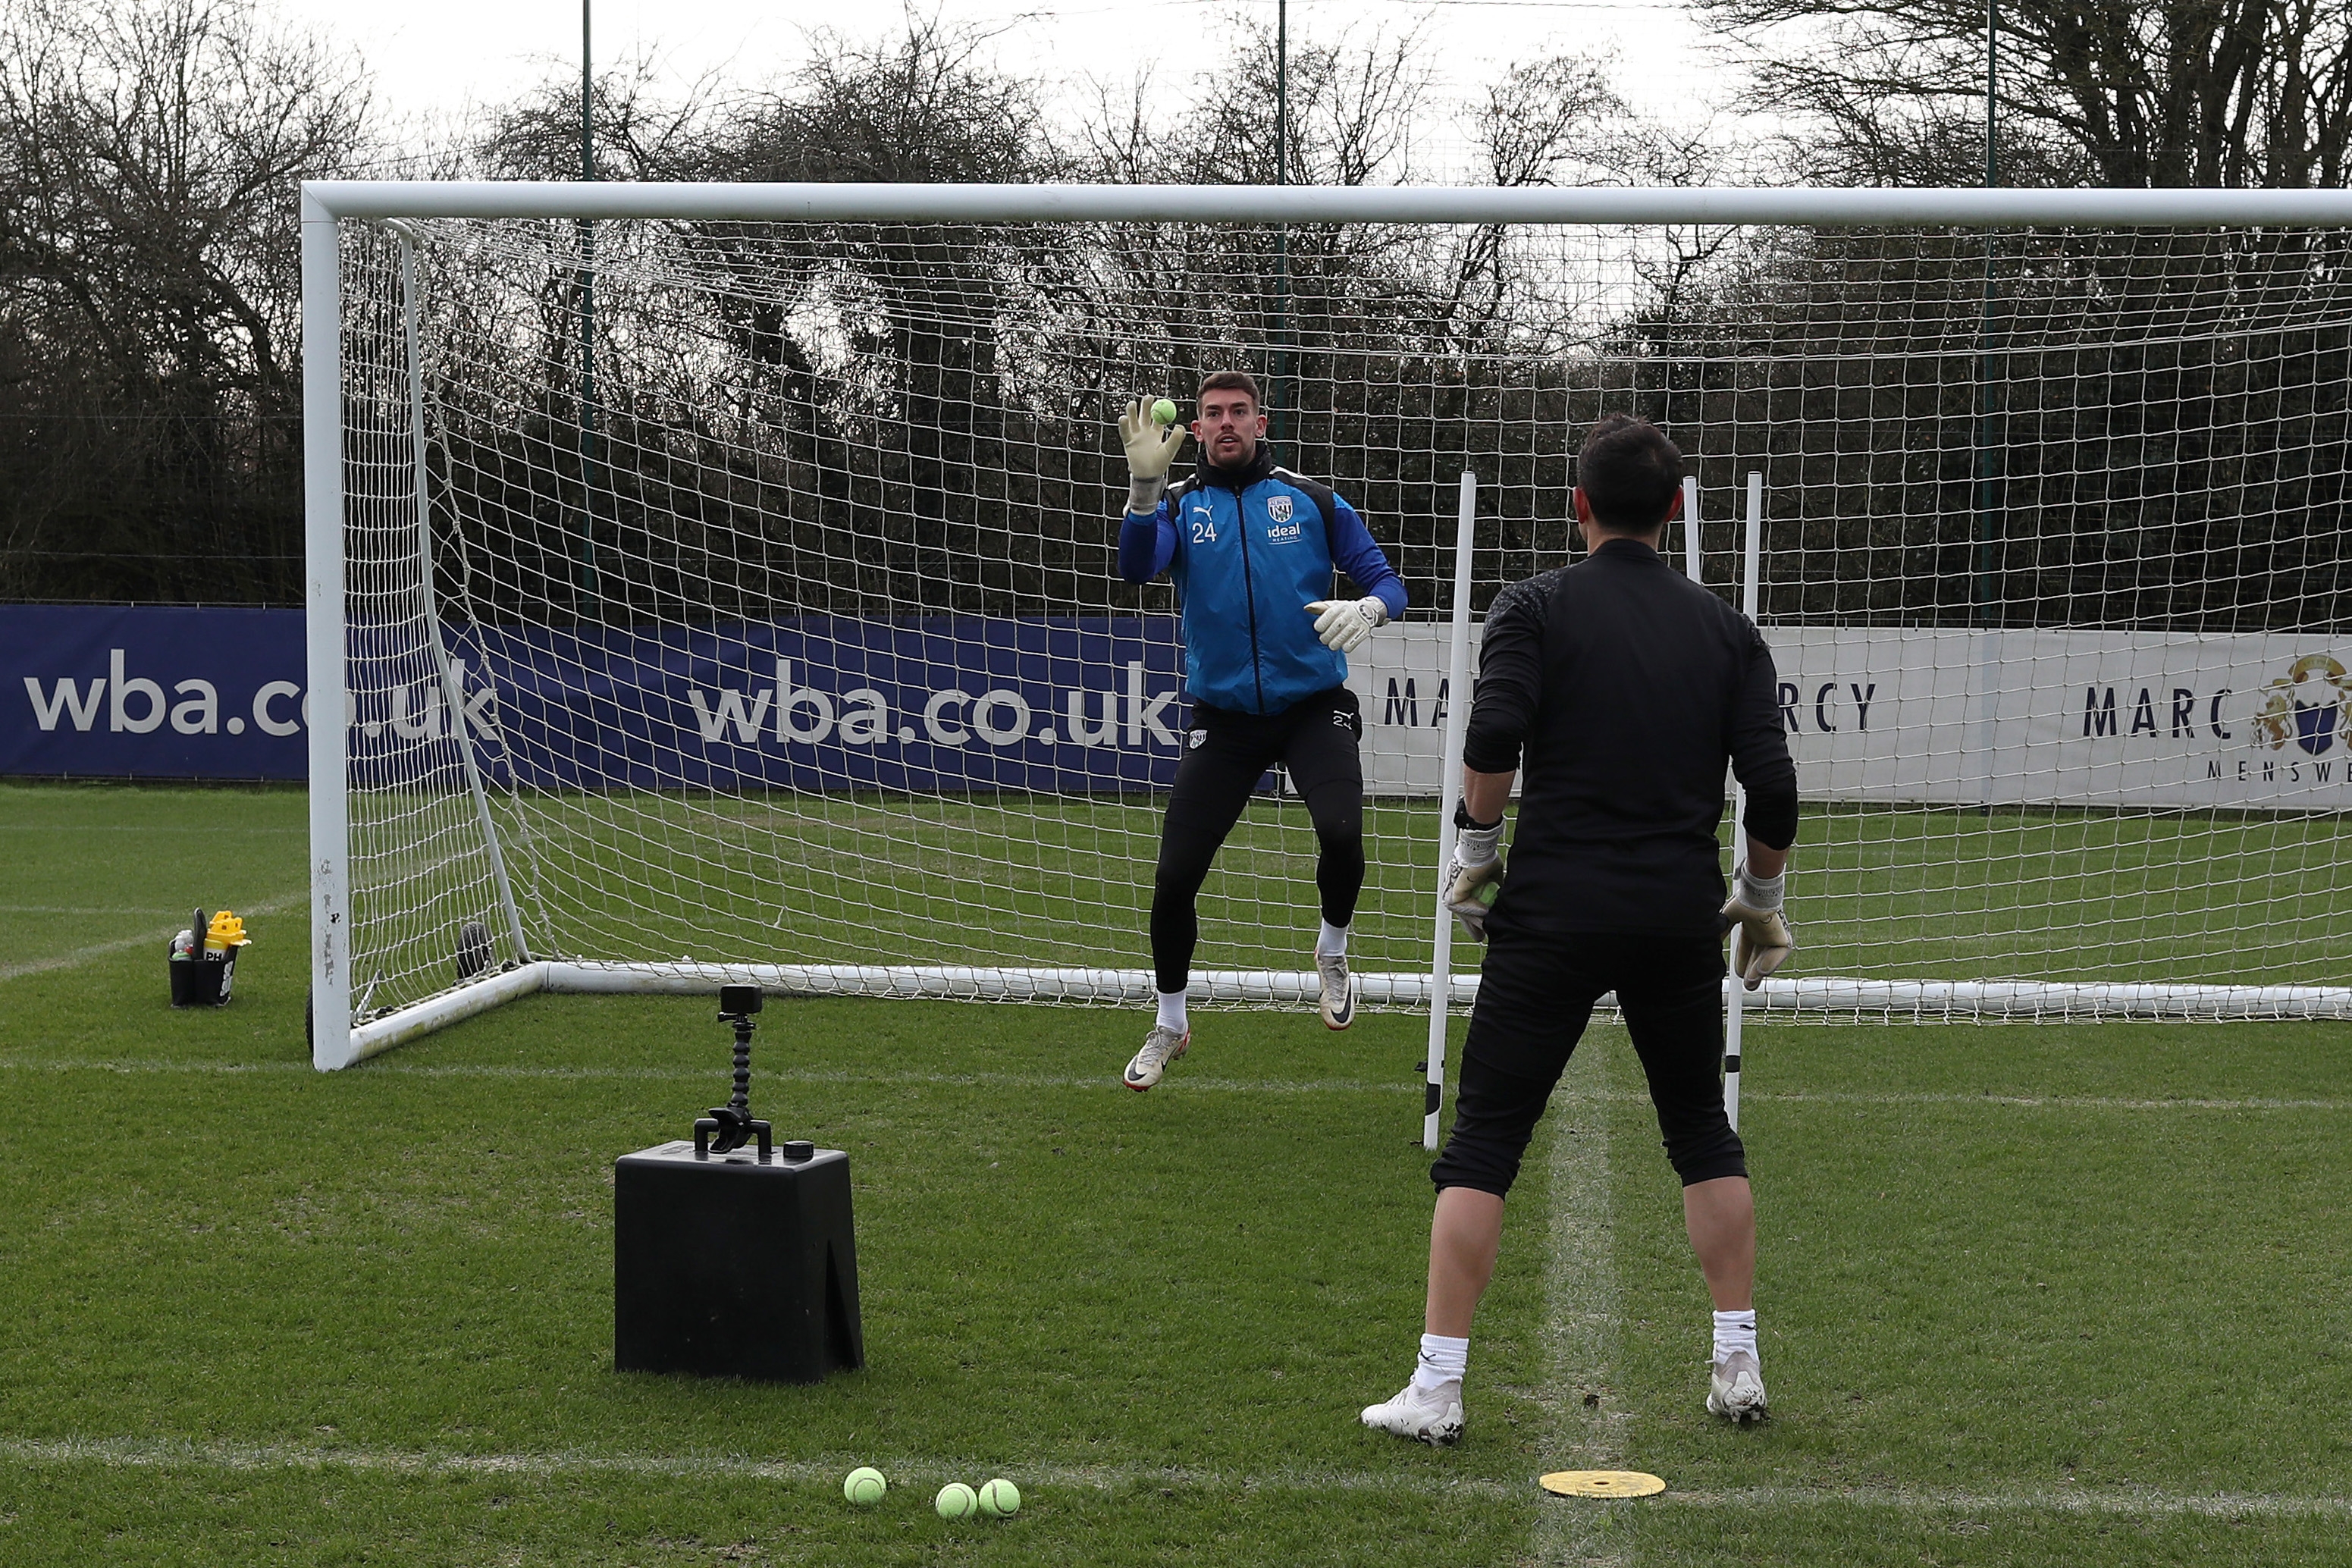 Alex Palmer working with a tennis ball and goalkeeping coach Marcos Abad